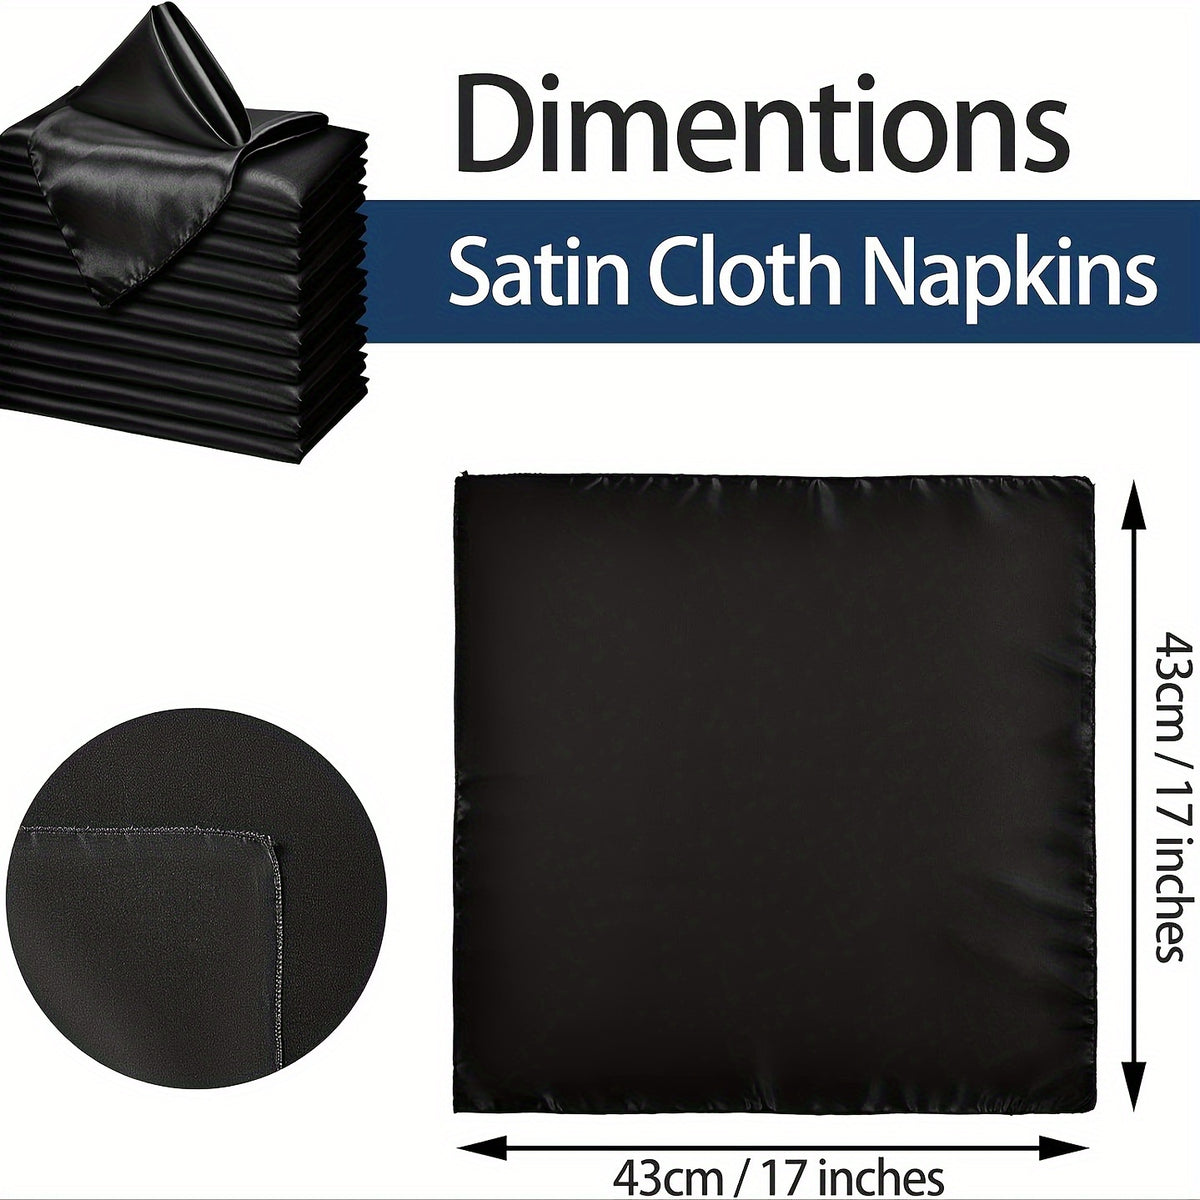 a pile of black satin cloth next to a pile of black satin cloth